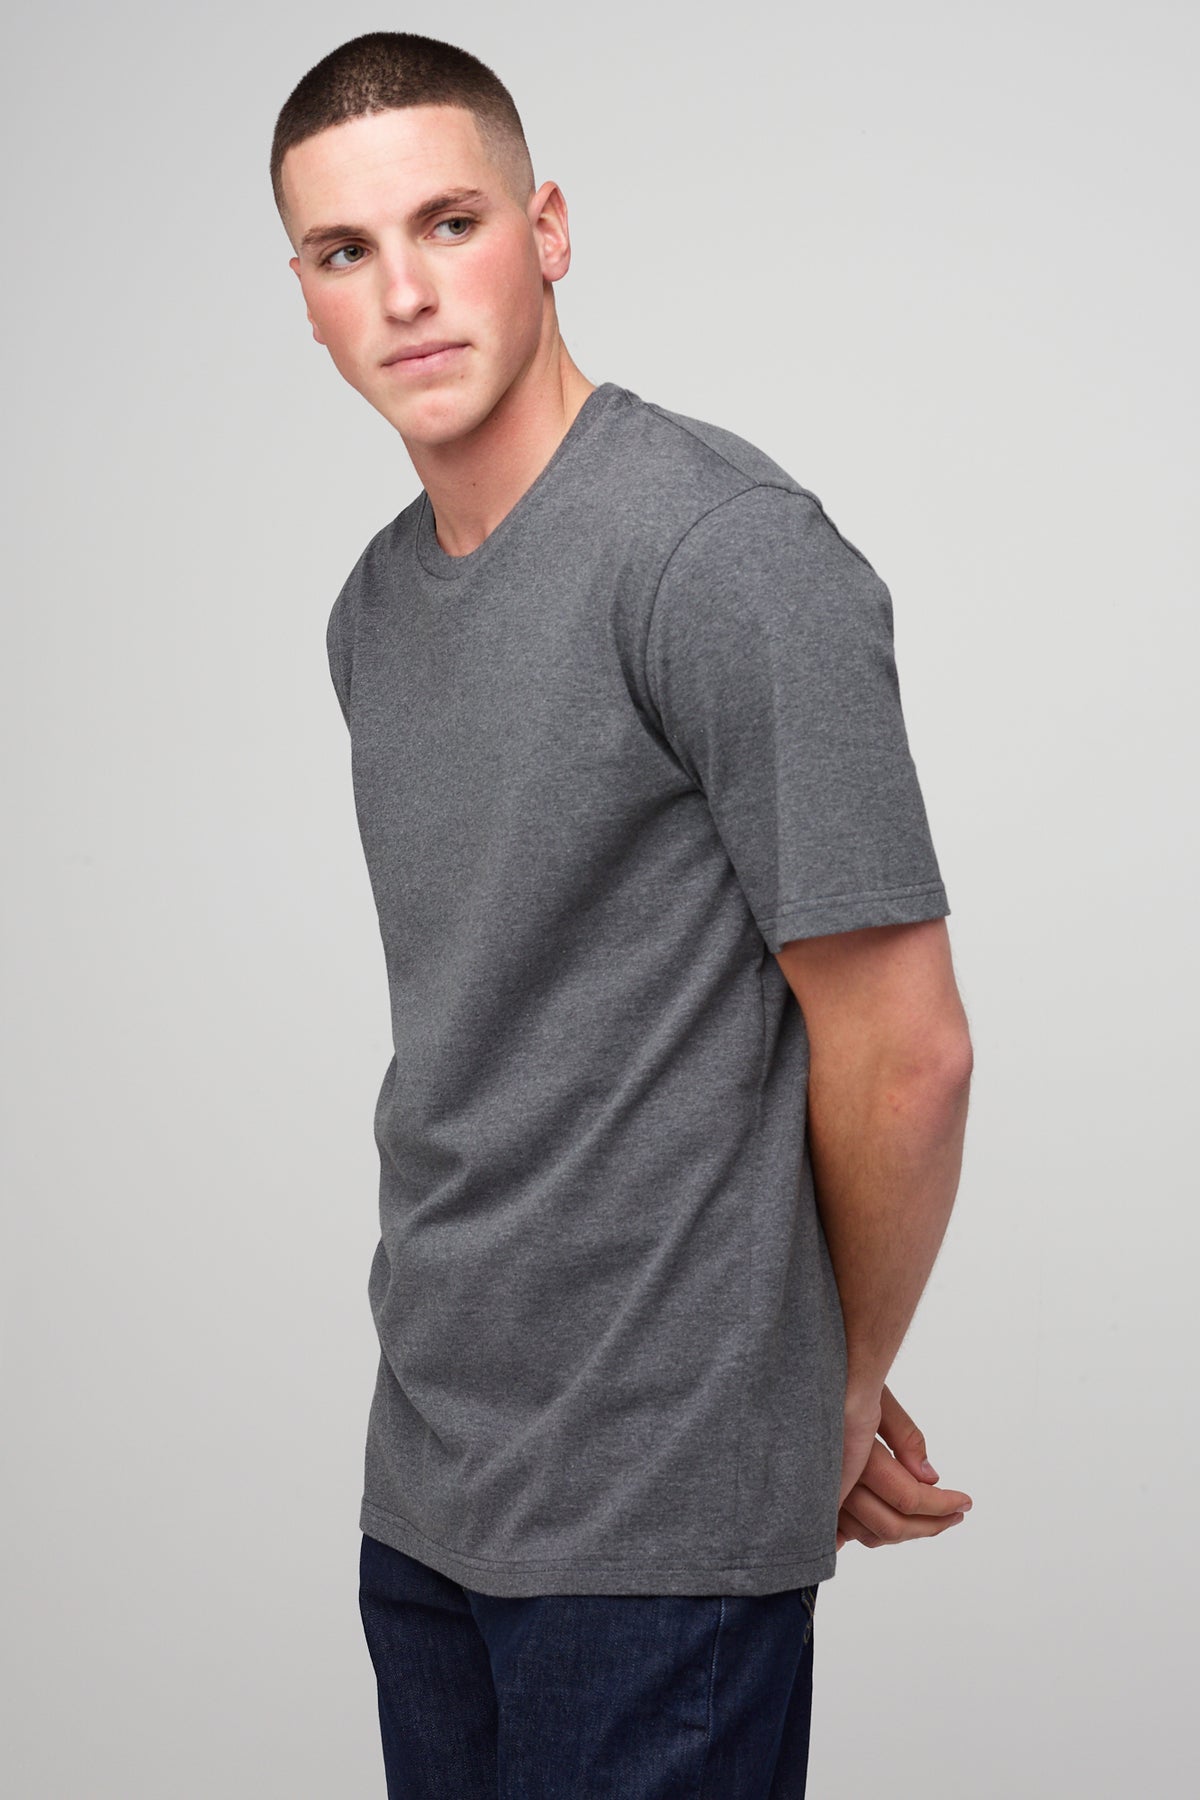 
            brunet, wite male wearing short sleeve t-shirt in charcoal